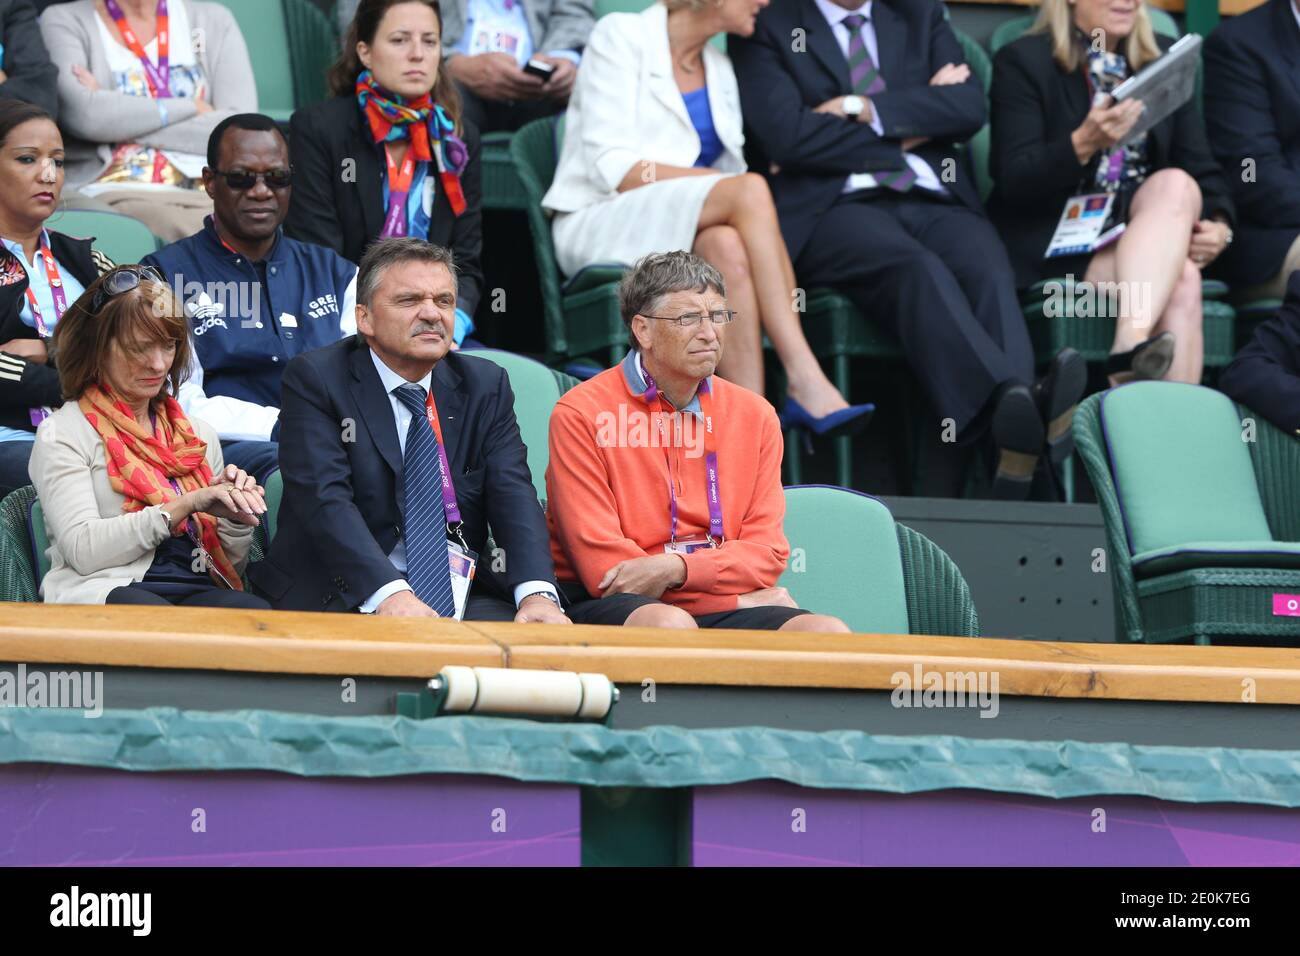 Bill Gates, Co-Chair, Bill & Melinda Gates Foundation and his wife Melinda  attend the men's Tennis Semi-Final during the 2012 London Olympic Games at  Wimbledon in London, UK on August 3, 2012.